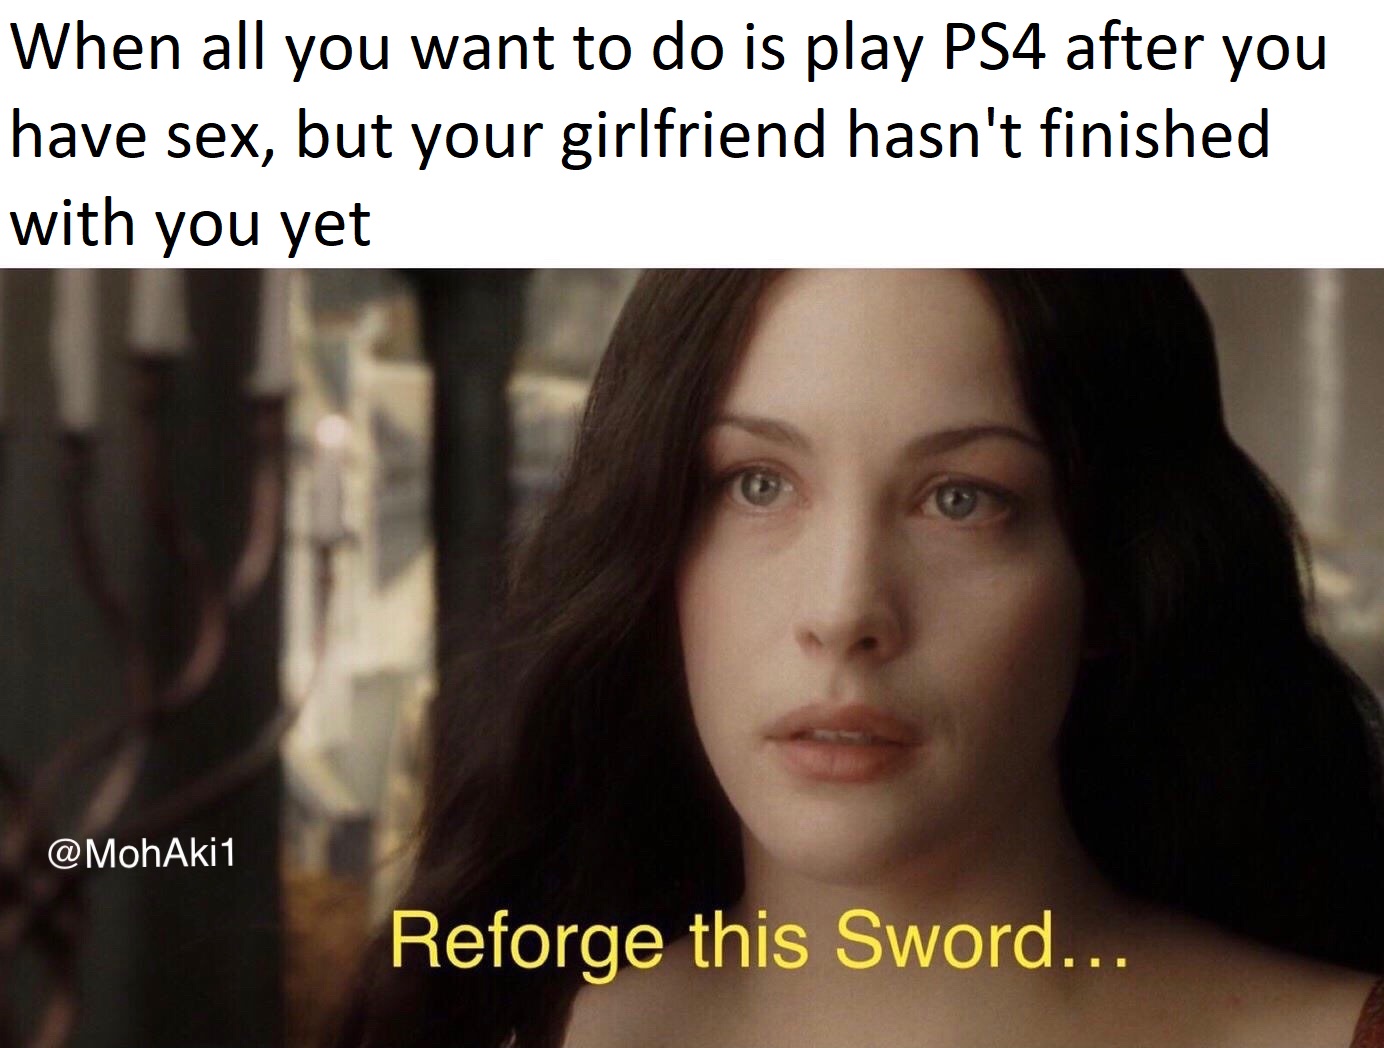 When all you want to do is play PS4 after you have sex, but your girlfriend hasn't finished with you yet Reforge this Sword...